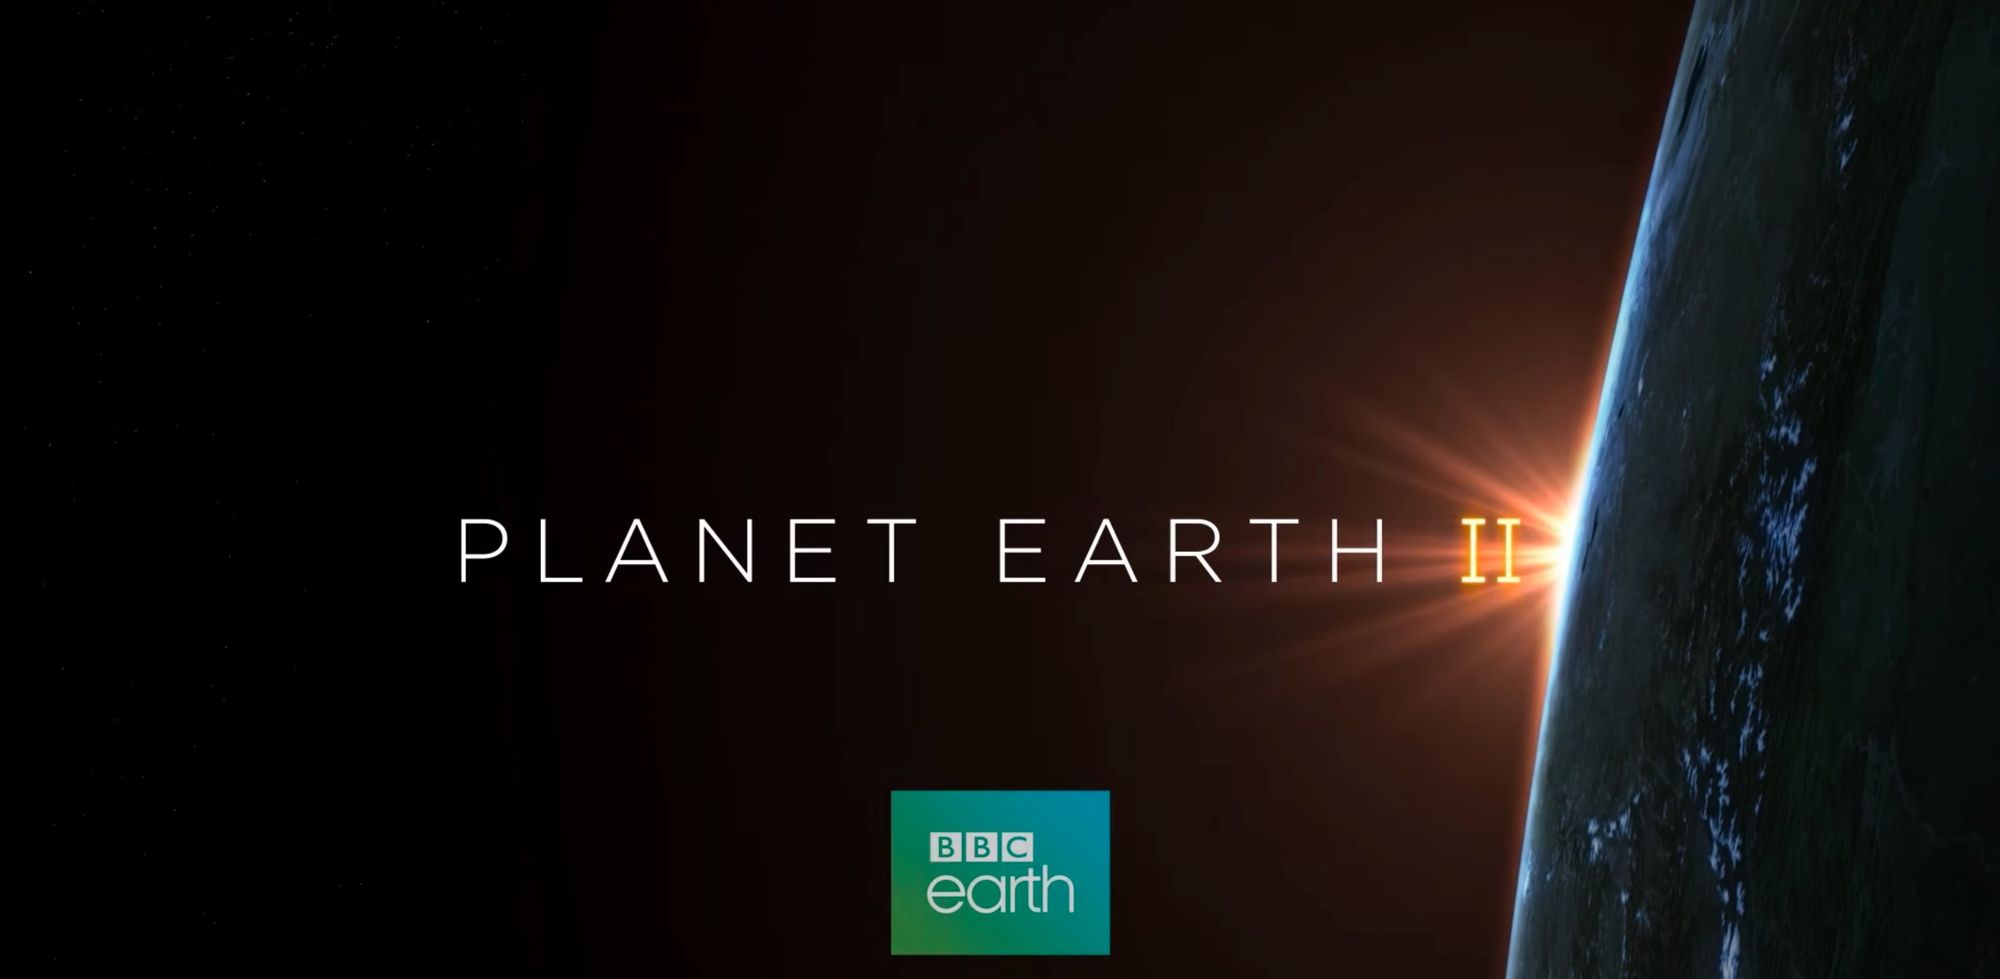 Trailer for BBC Planet Earth II